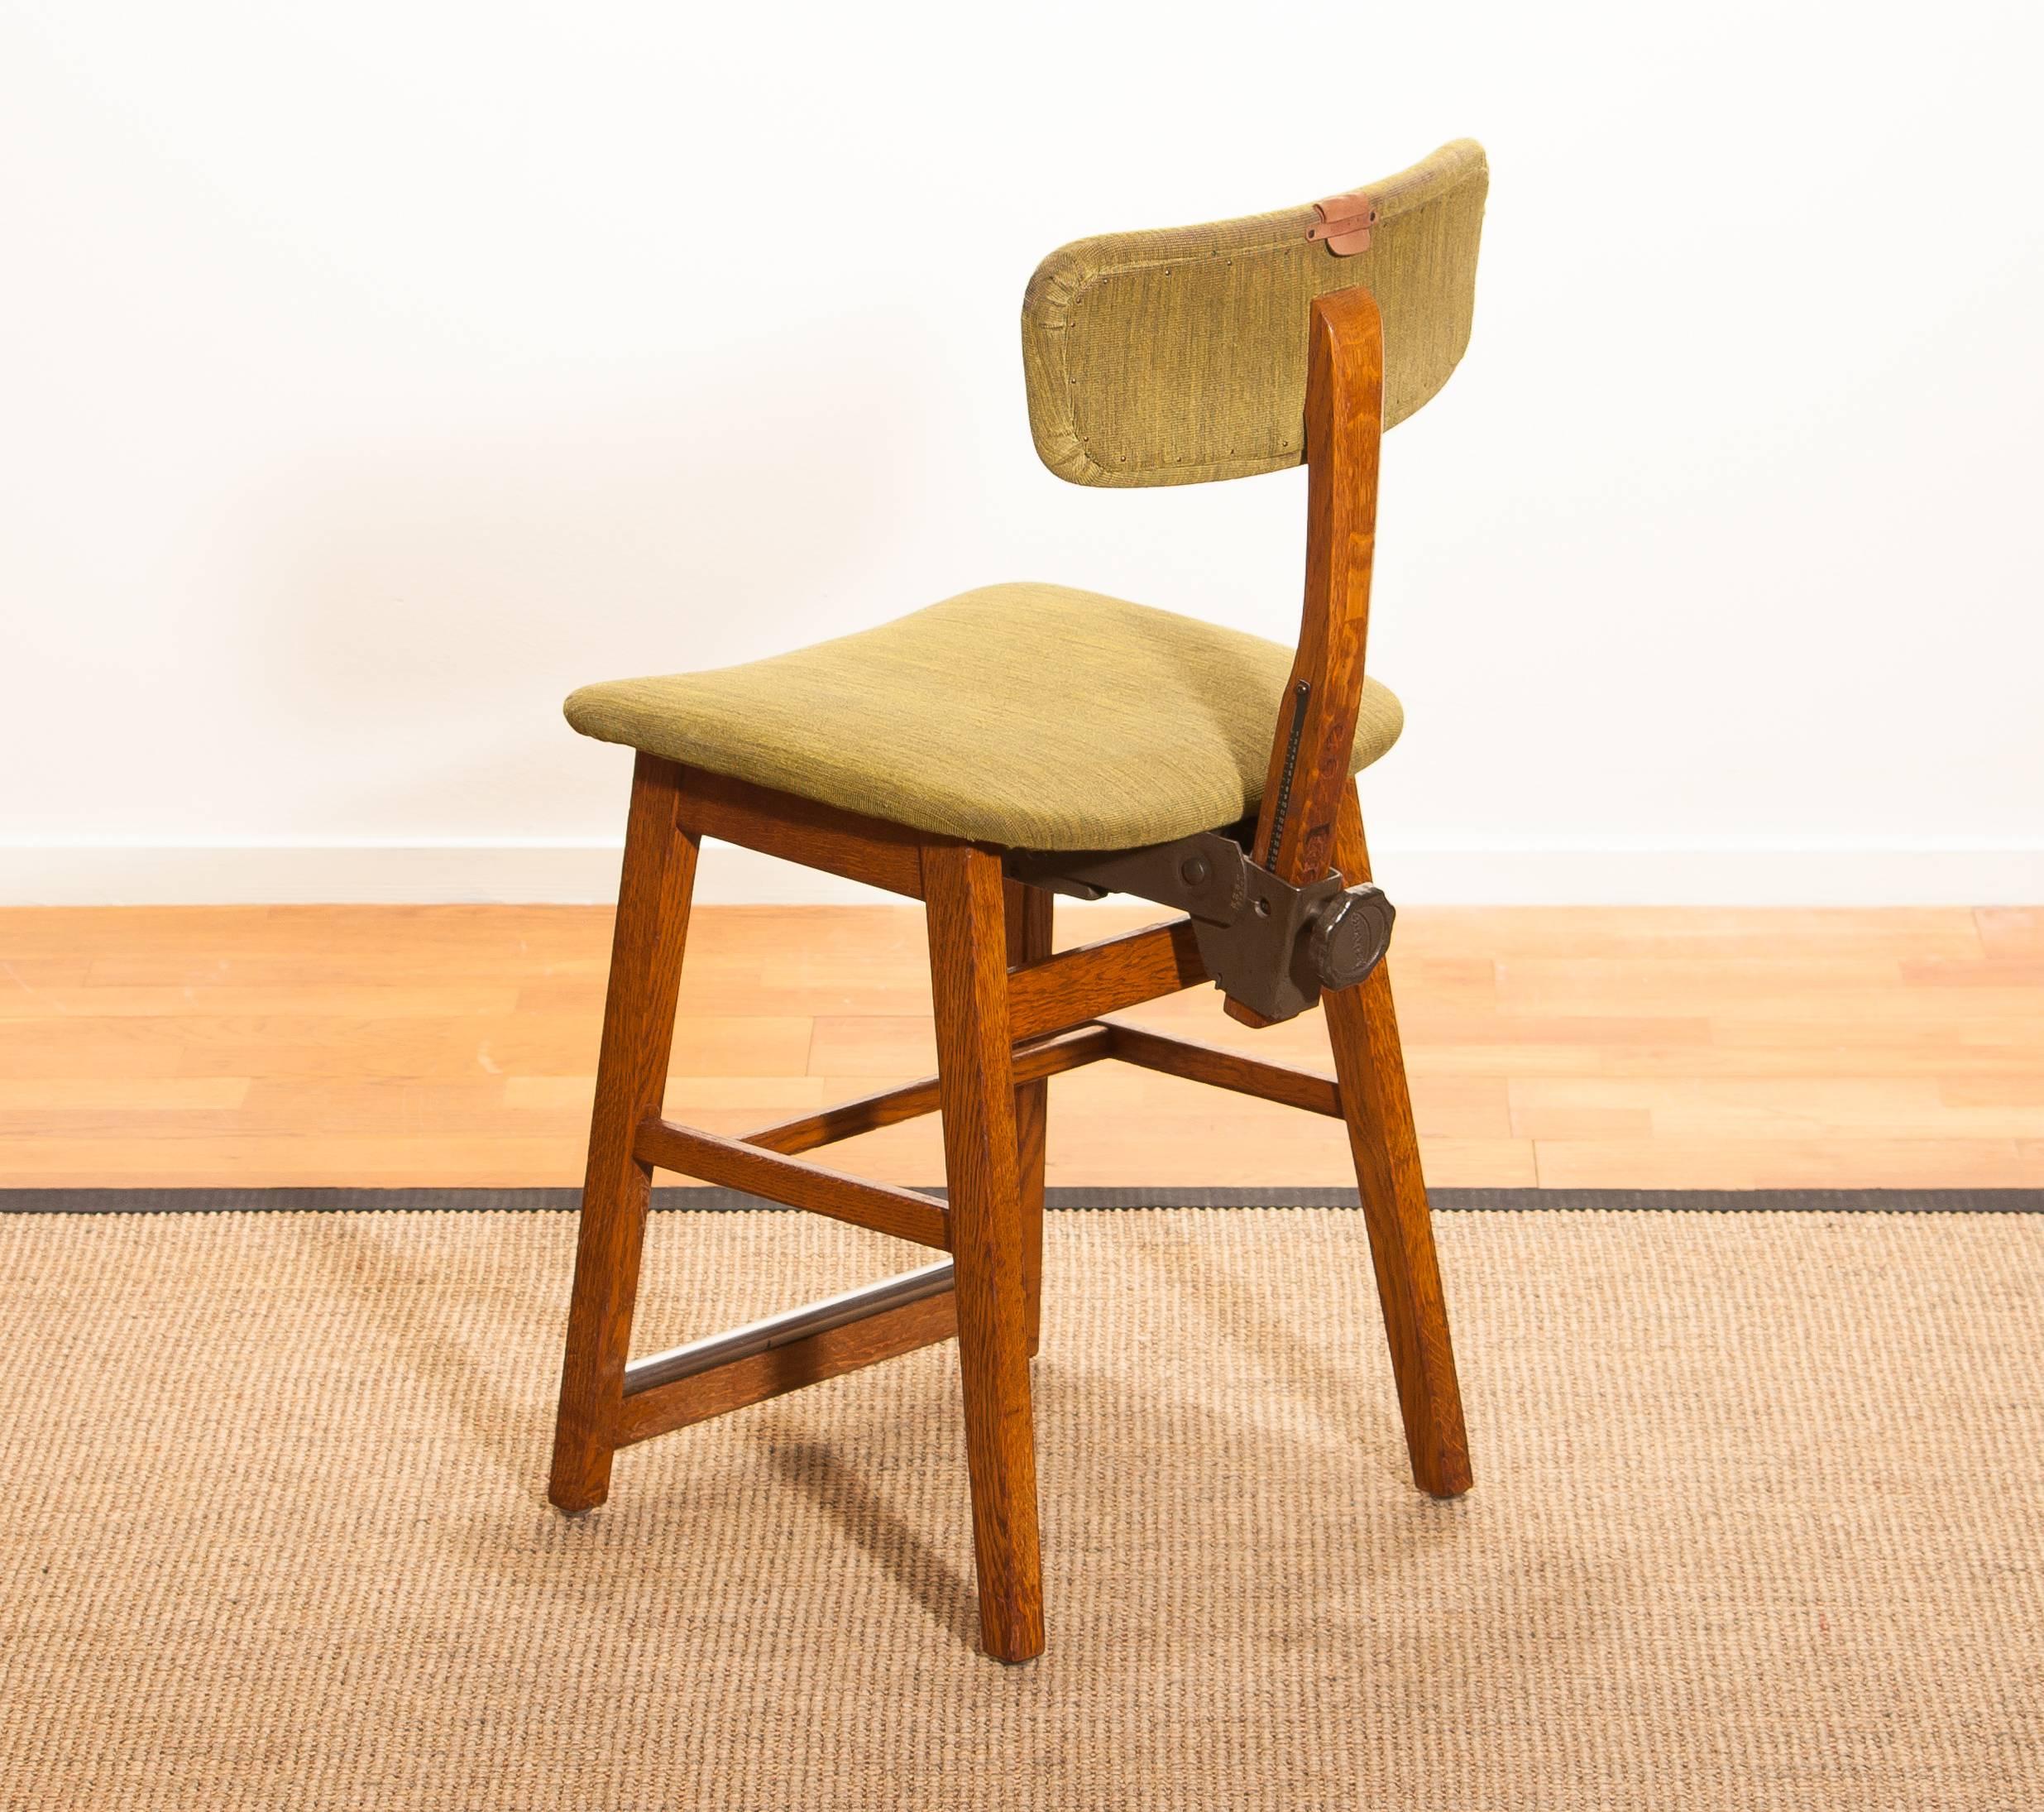 1960s, Teak and Wool Desk Chair by Âtvidabergs Sweden 2